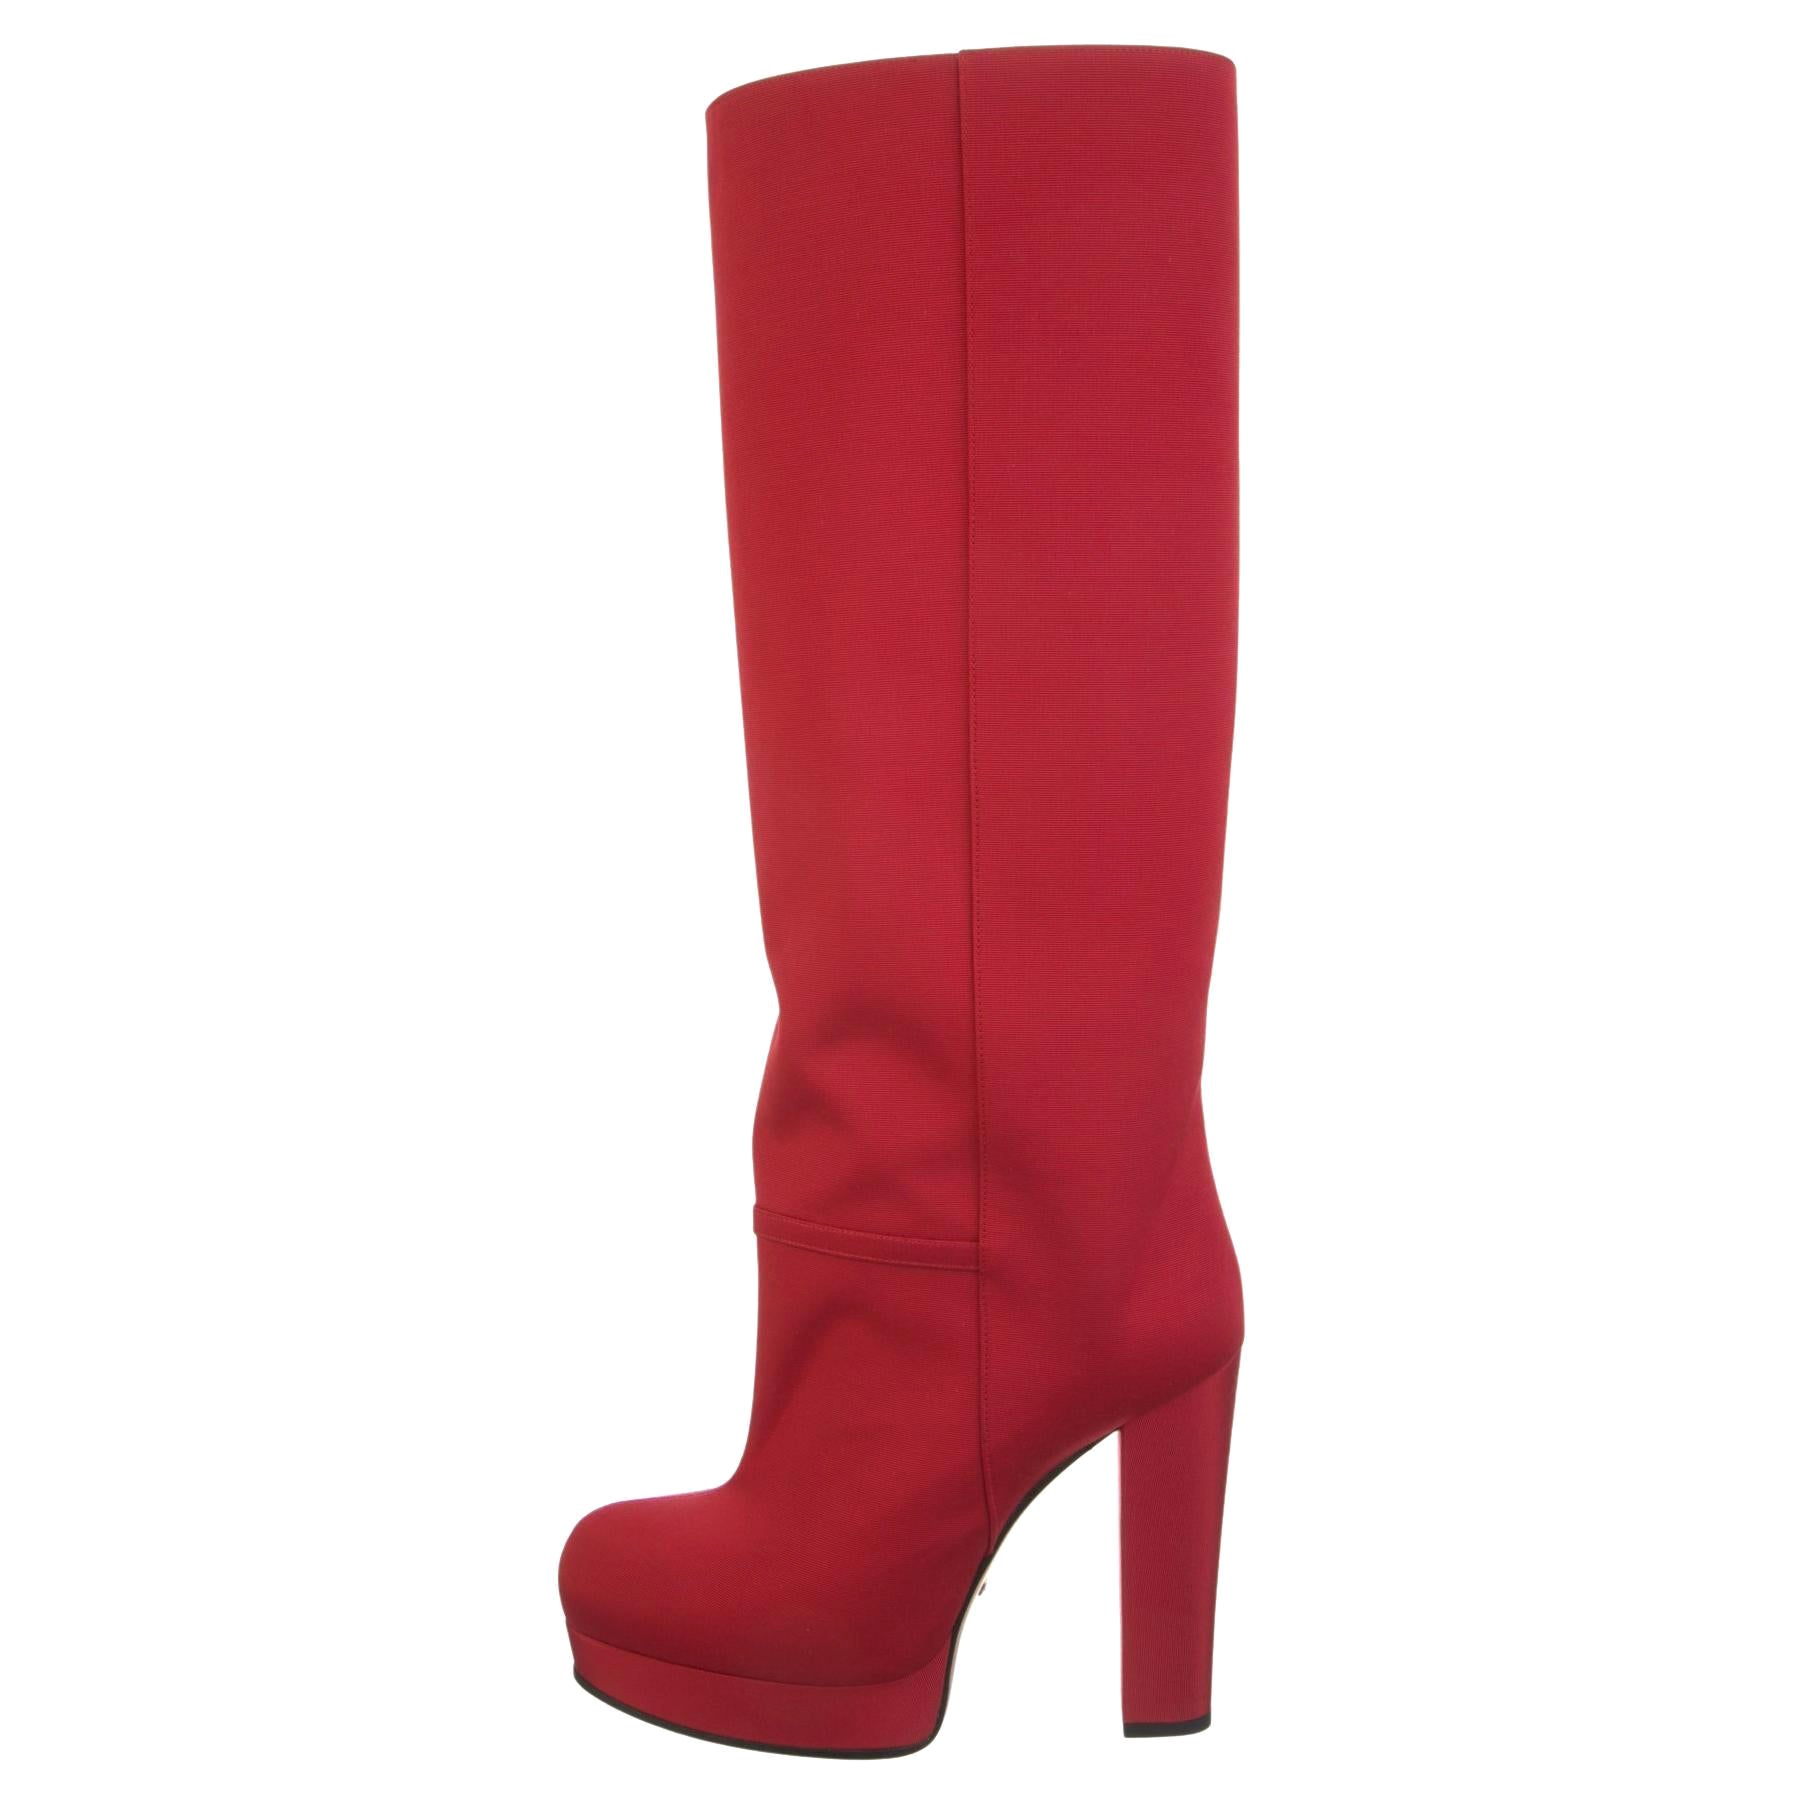 New With Box Gucci Fall 2019 Alessandro Michele Red Boots Sz 38.5 For Sale